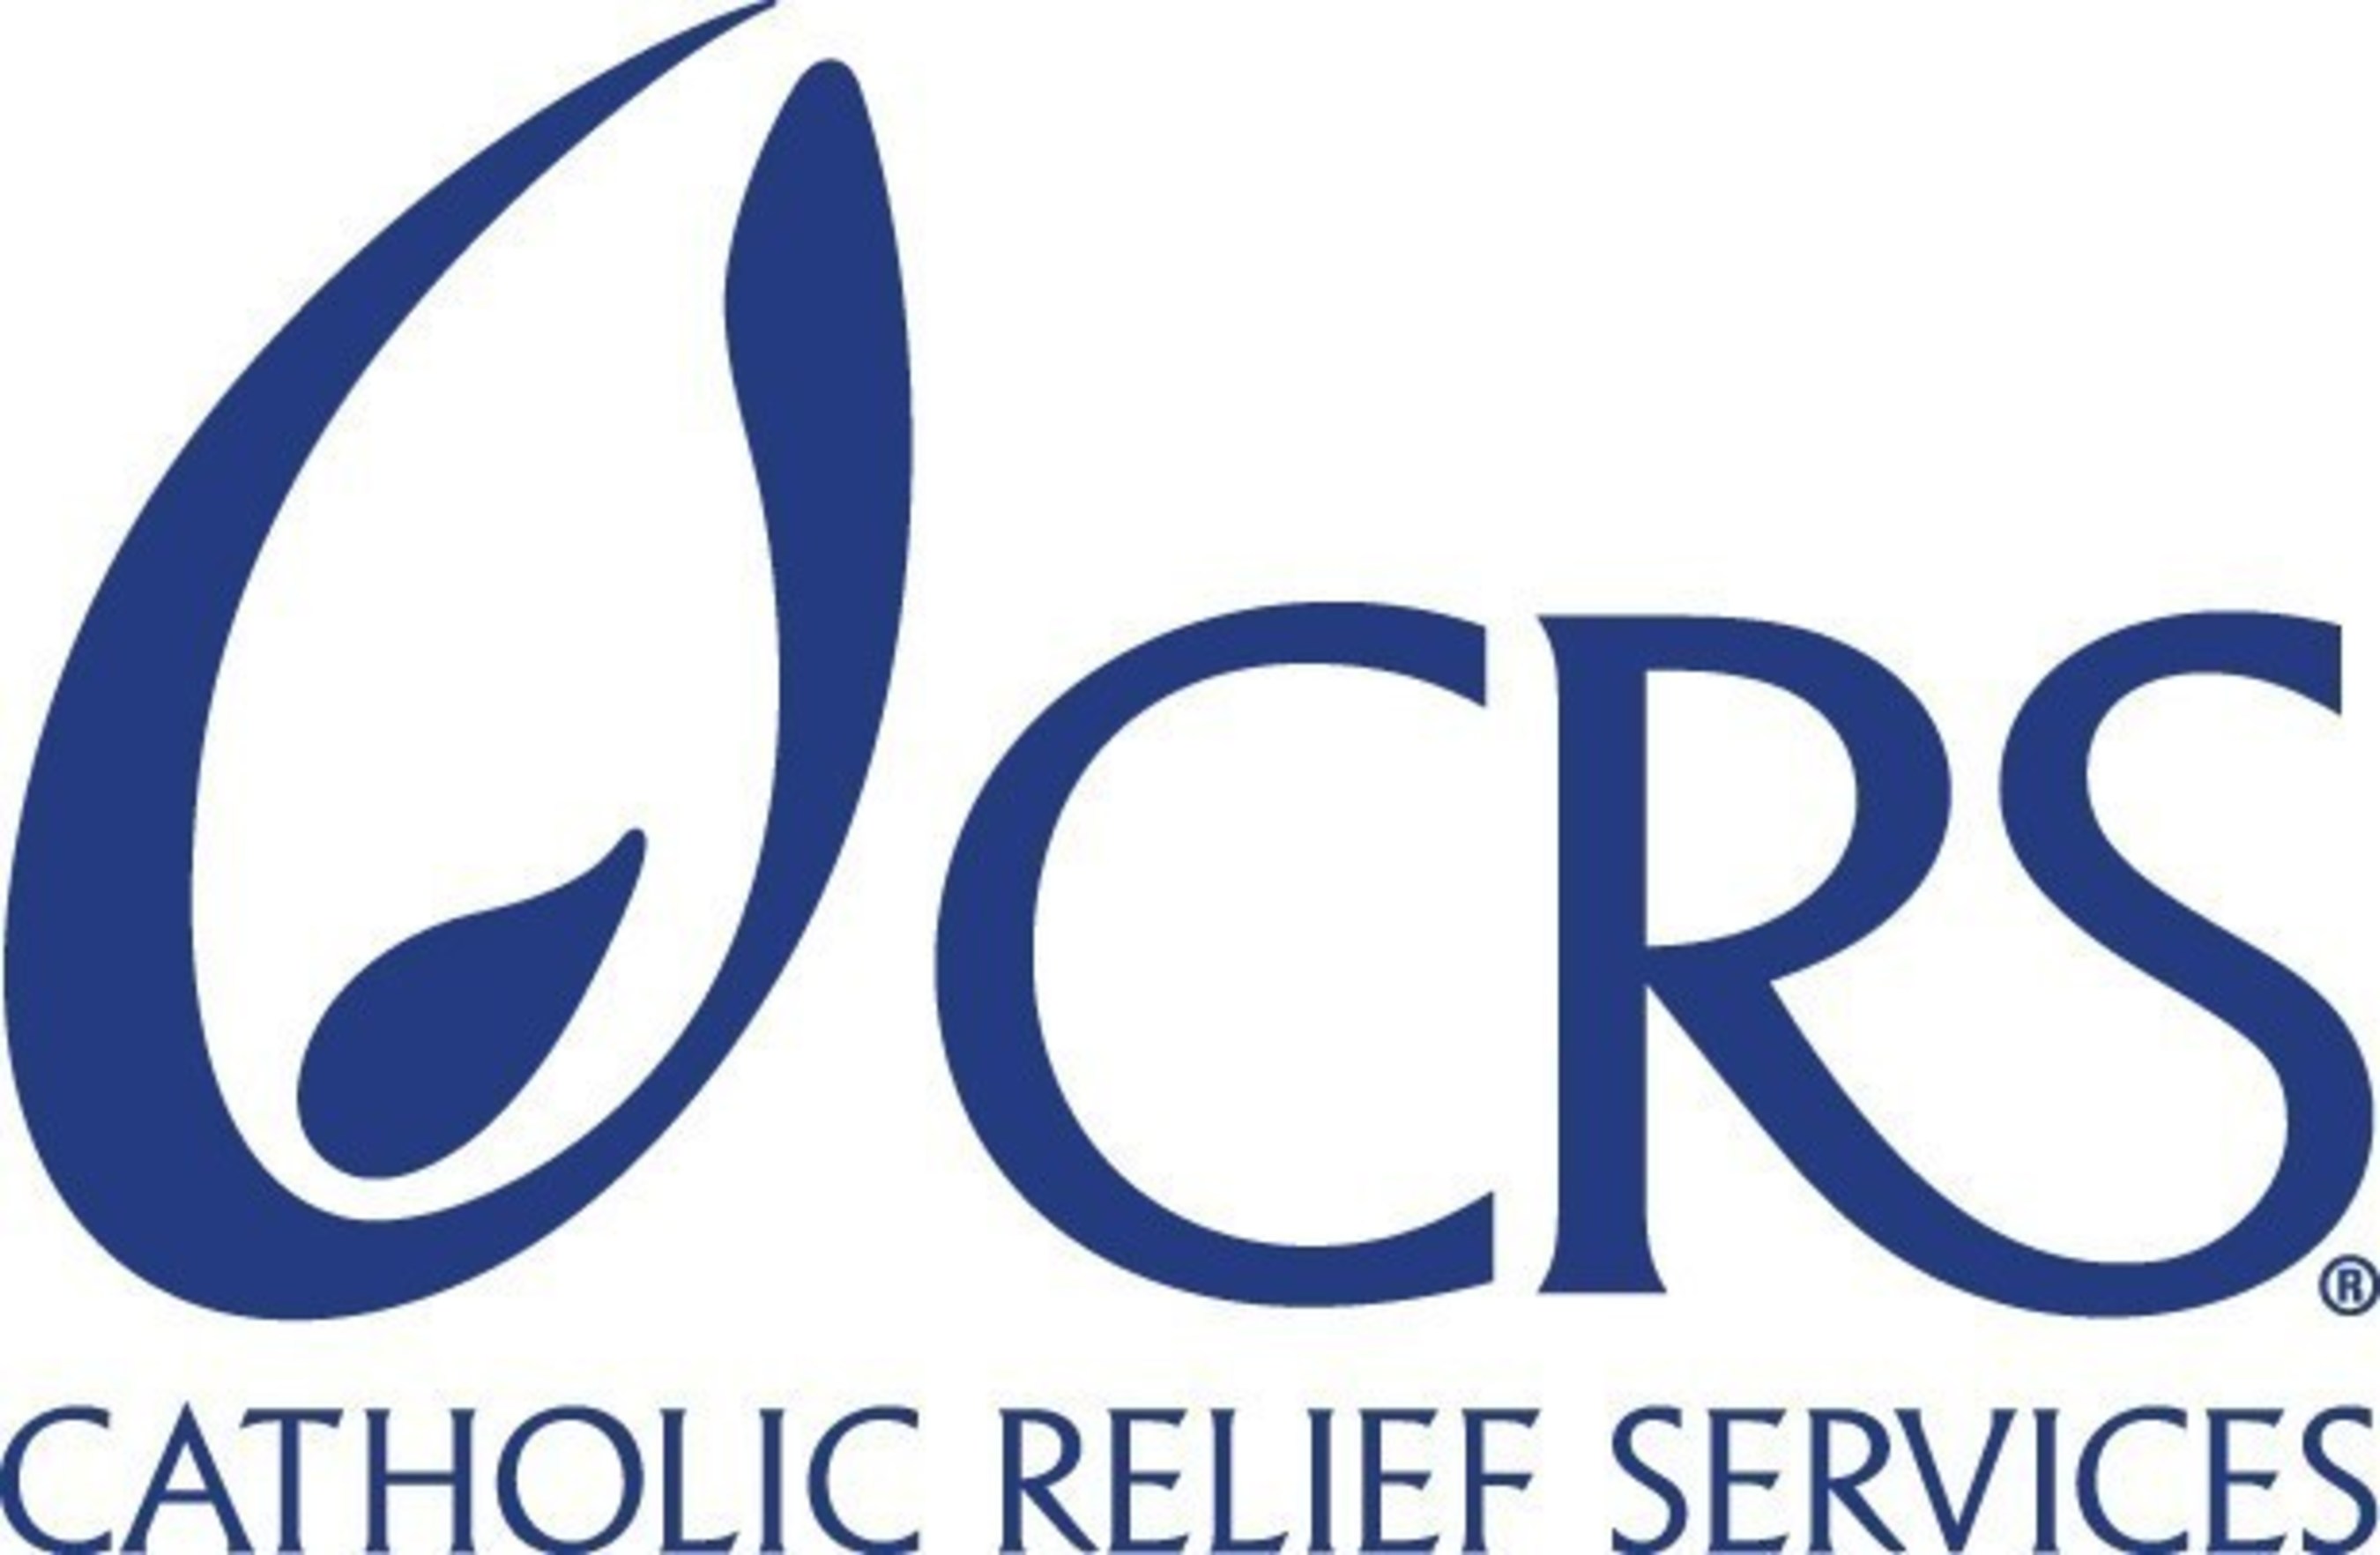 For more information on Catholic Relief Services visit, www.crs.org and www.crsespanol.org.